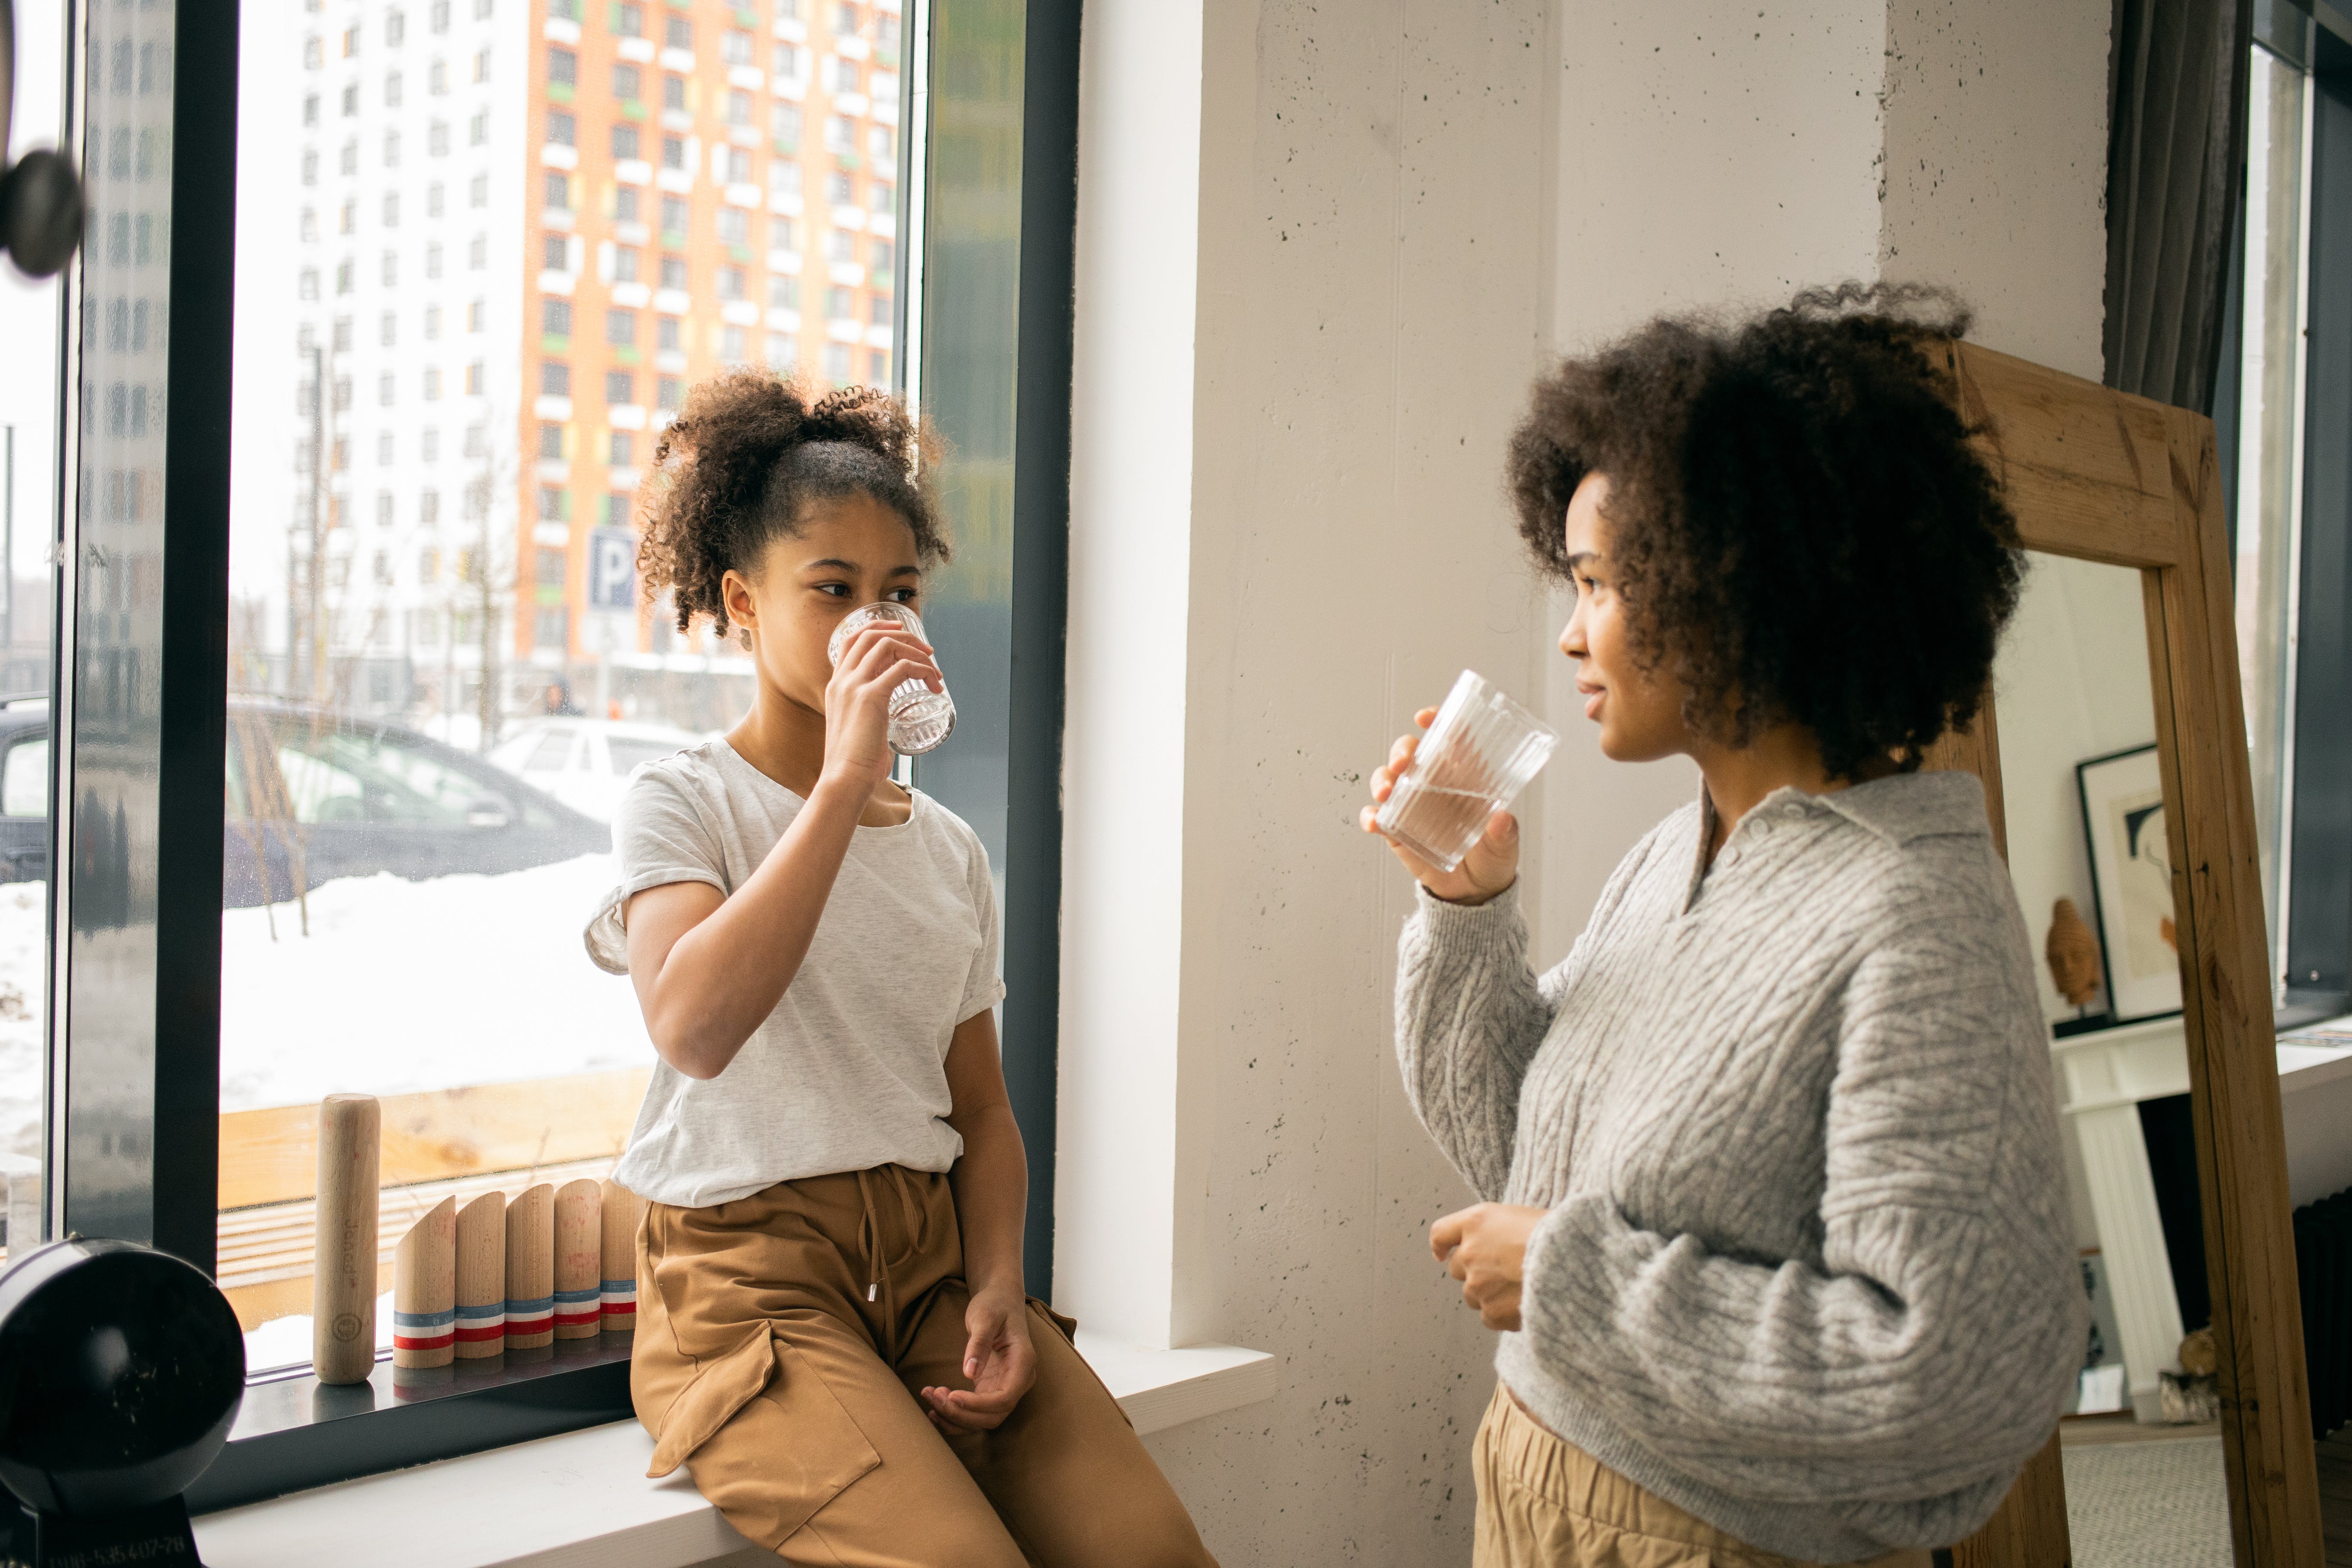 Mom and daughter drinking water. | Source: Pexels